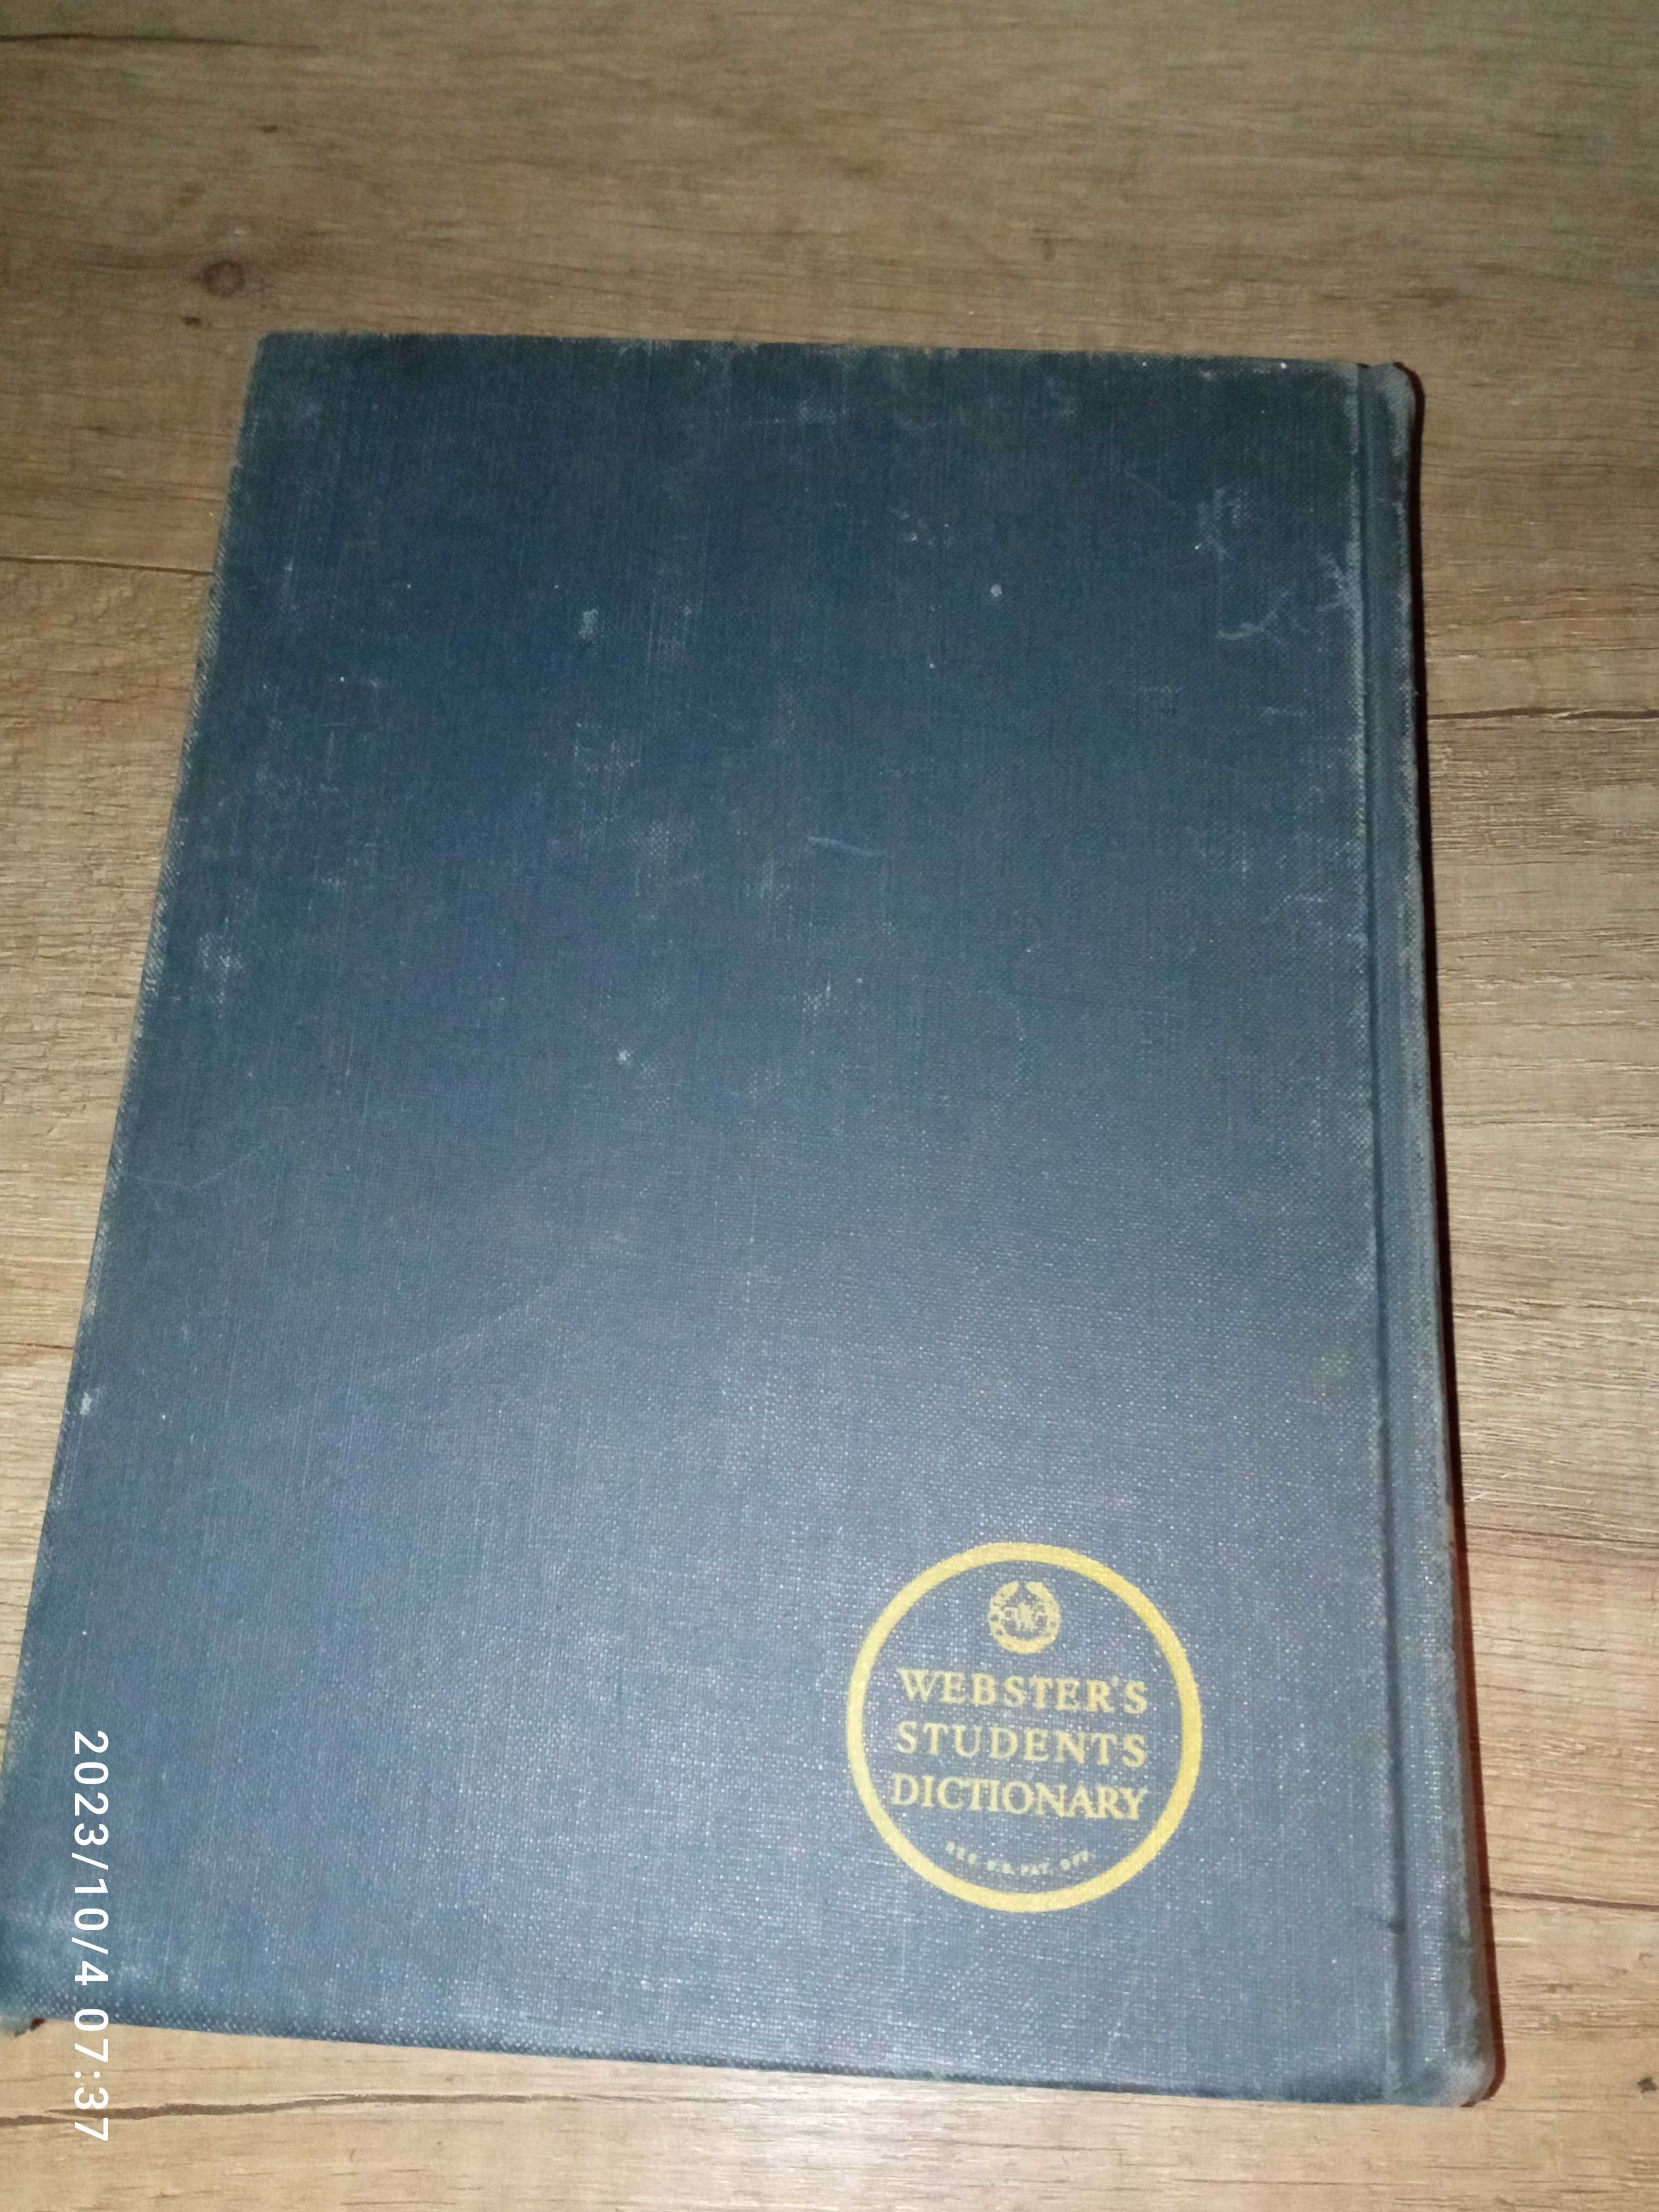 Webster's Students Dictionary 1959